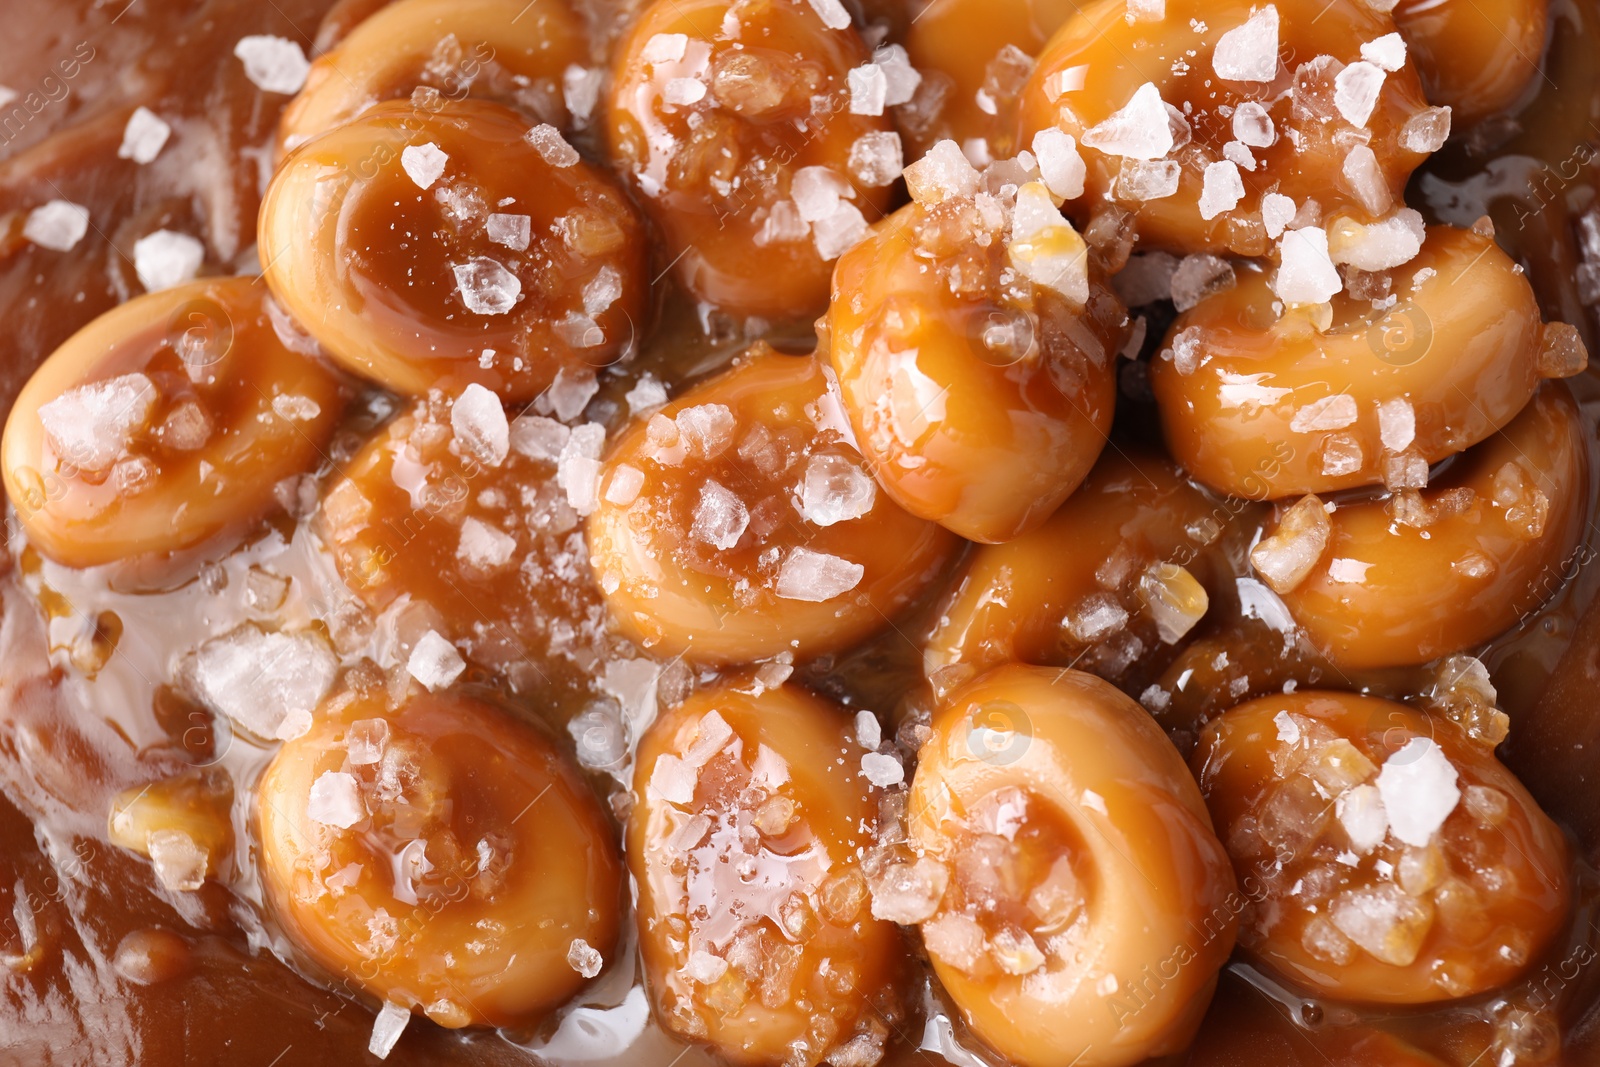 Photo of Tasty candies, caramel sauce and salt as background, top view